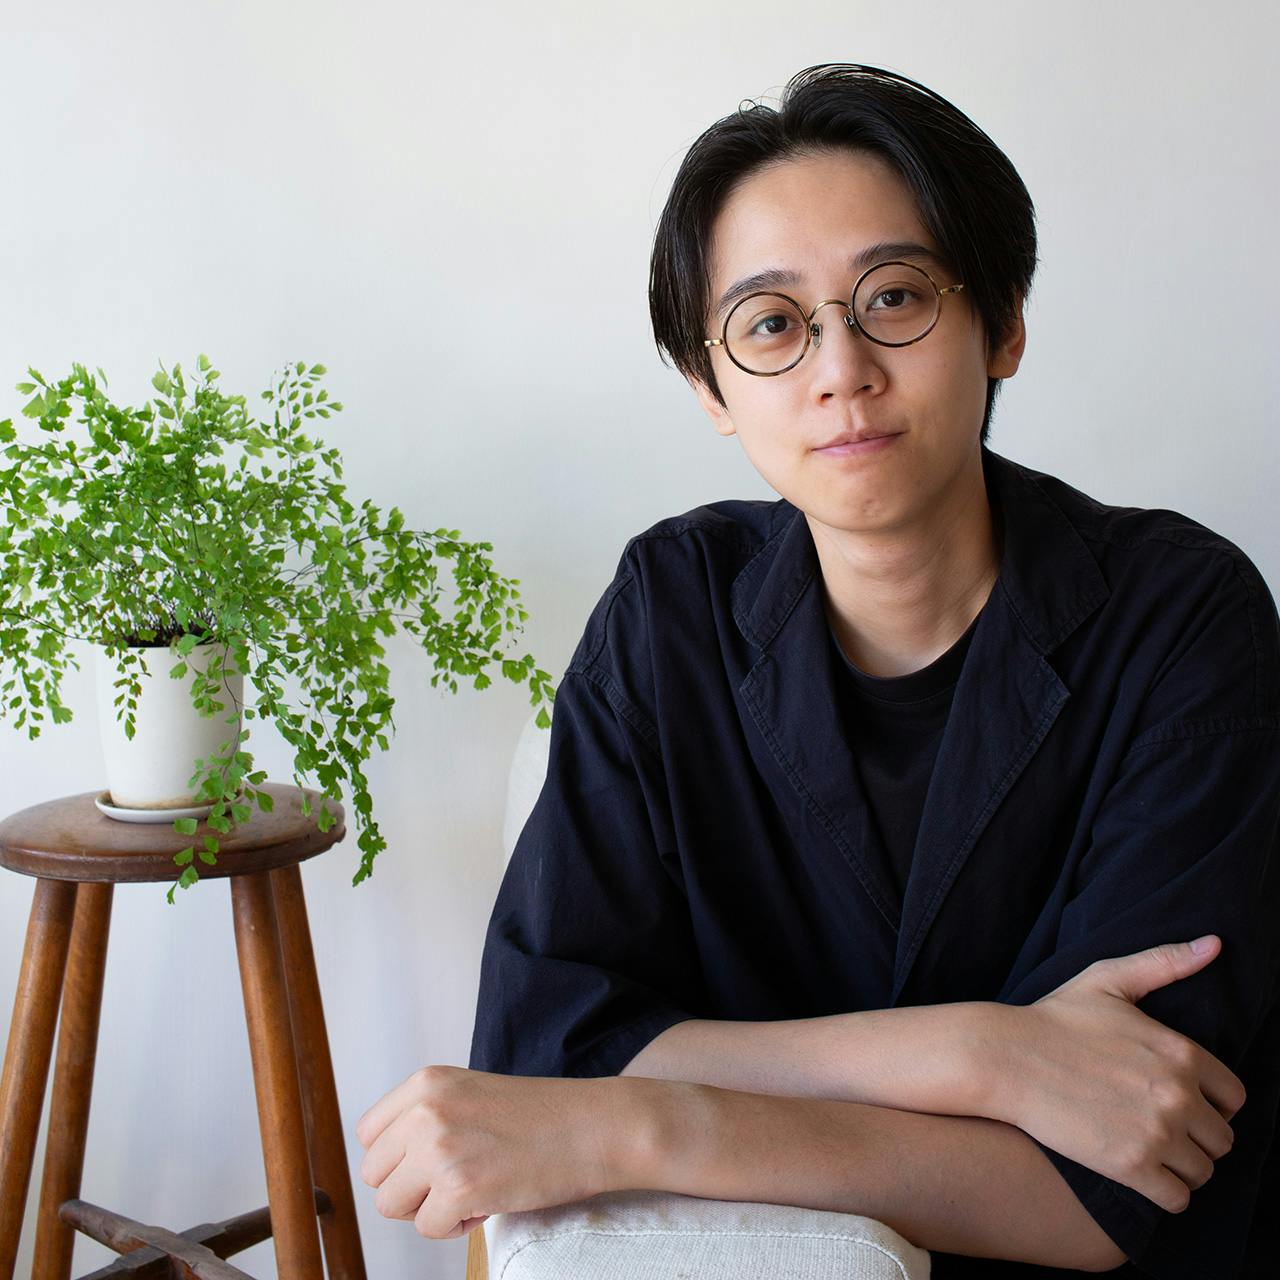 A person with short black hair sitting with their arms crossed next to a plant.